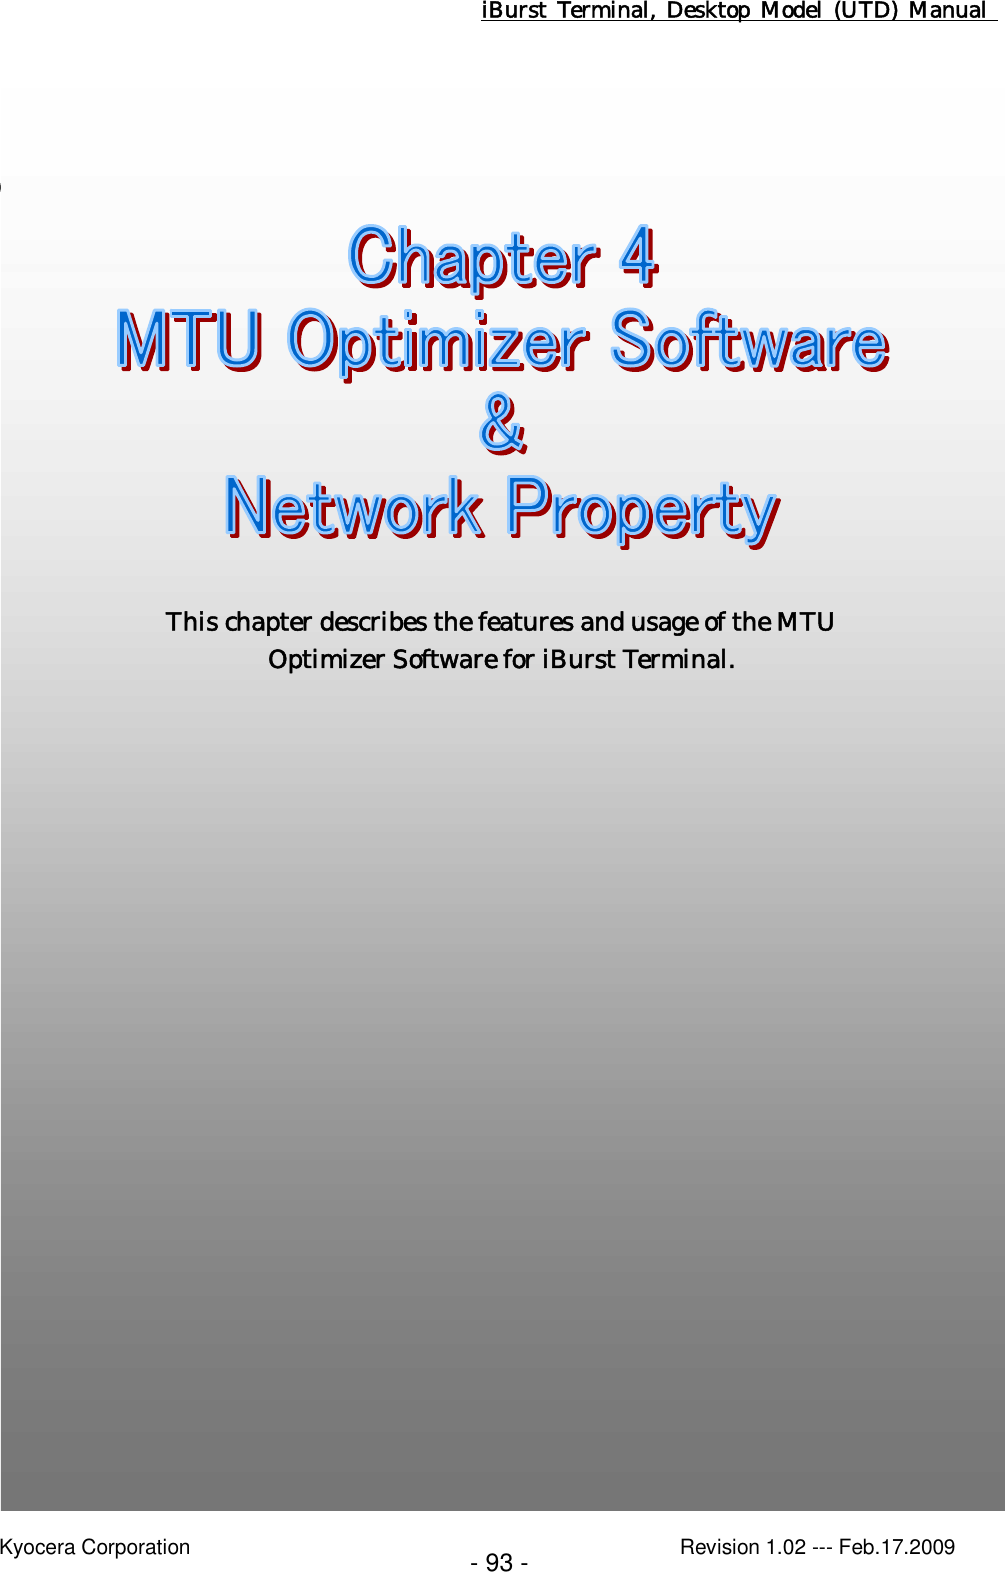 iBurst  Terminal, Desktop  Model  (UTD)  Manual    Kyocera Corporation                                                                                              Revision 1.02 --- Feb.17.2009 - 93 -   Chapter 4 MTU Optimizer Software &amp; Network Property                                  This chapter describes the features and usage of the MTU Optimizer Software for iBurst Terminal.  